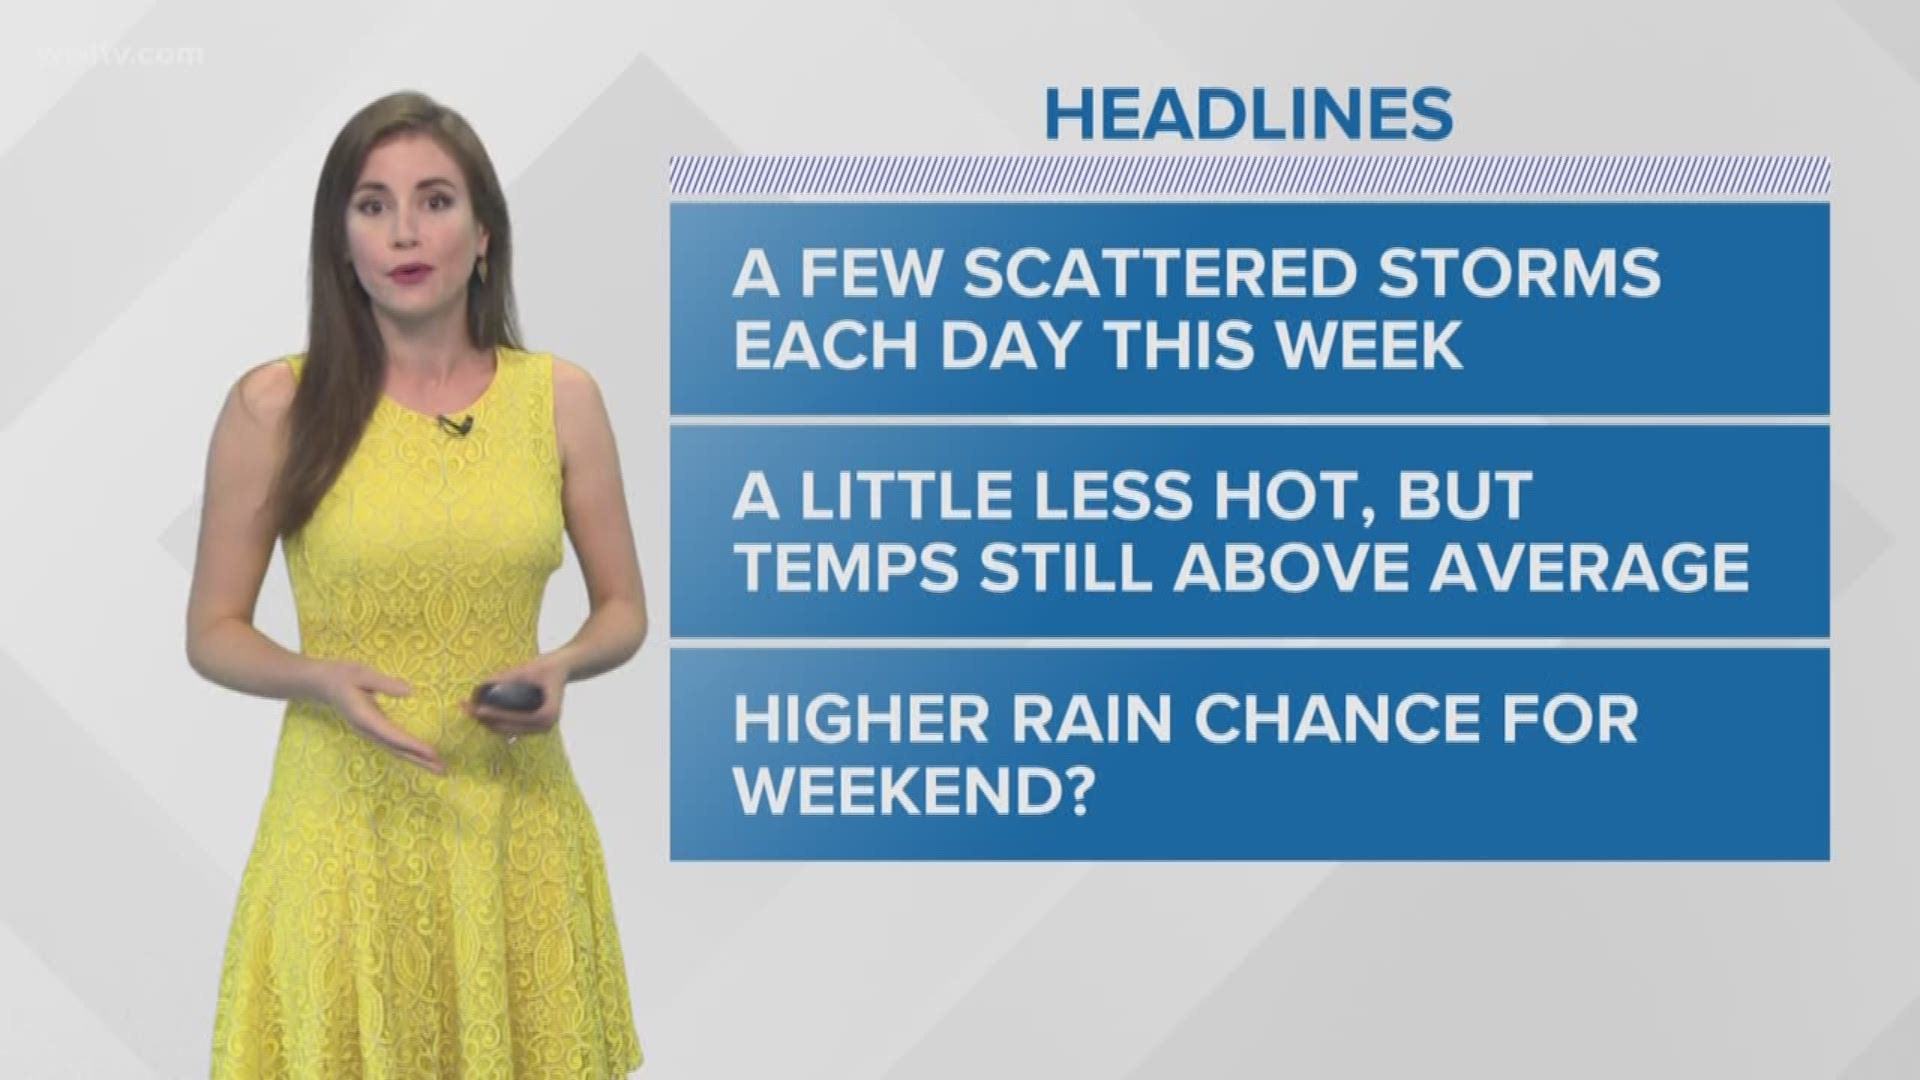 Meteorologist Alexandra Cranford has the forecast at 10 p.m. on Sunday, May 20, 2018.